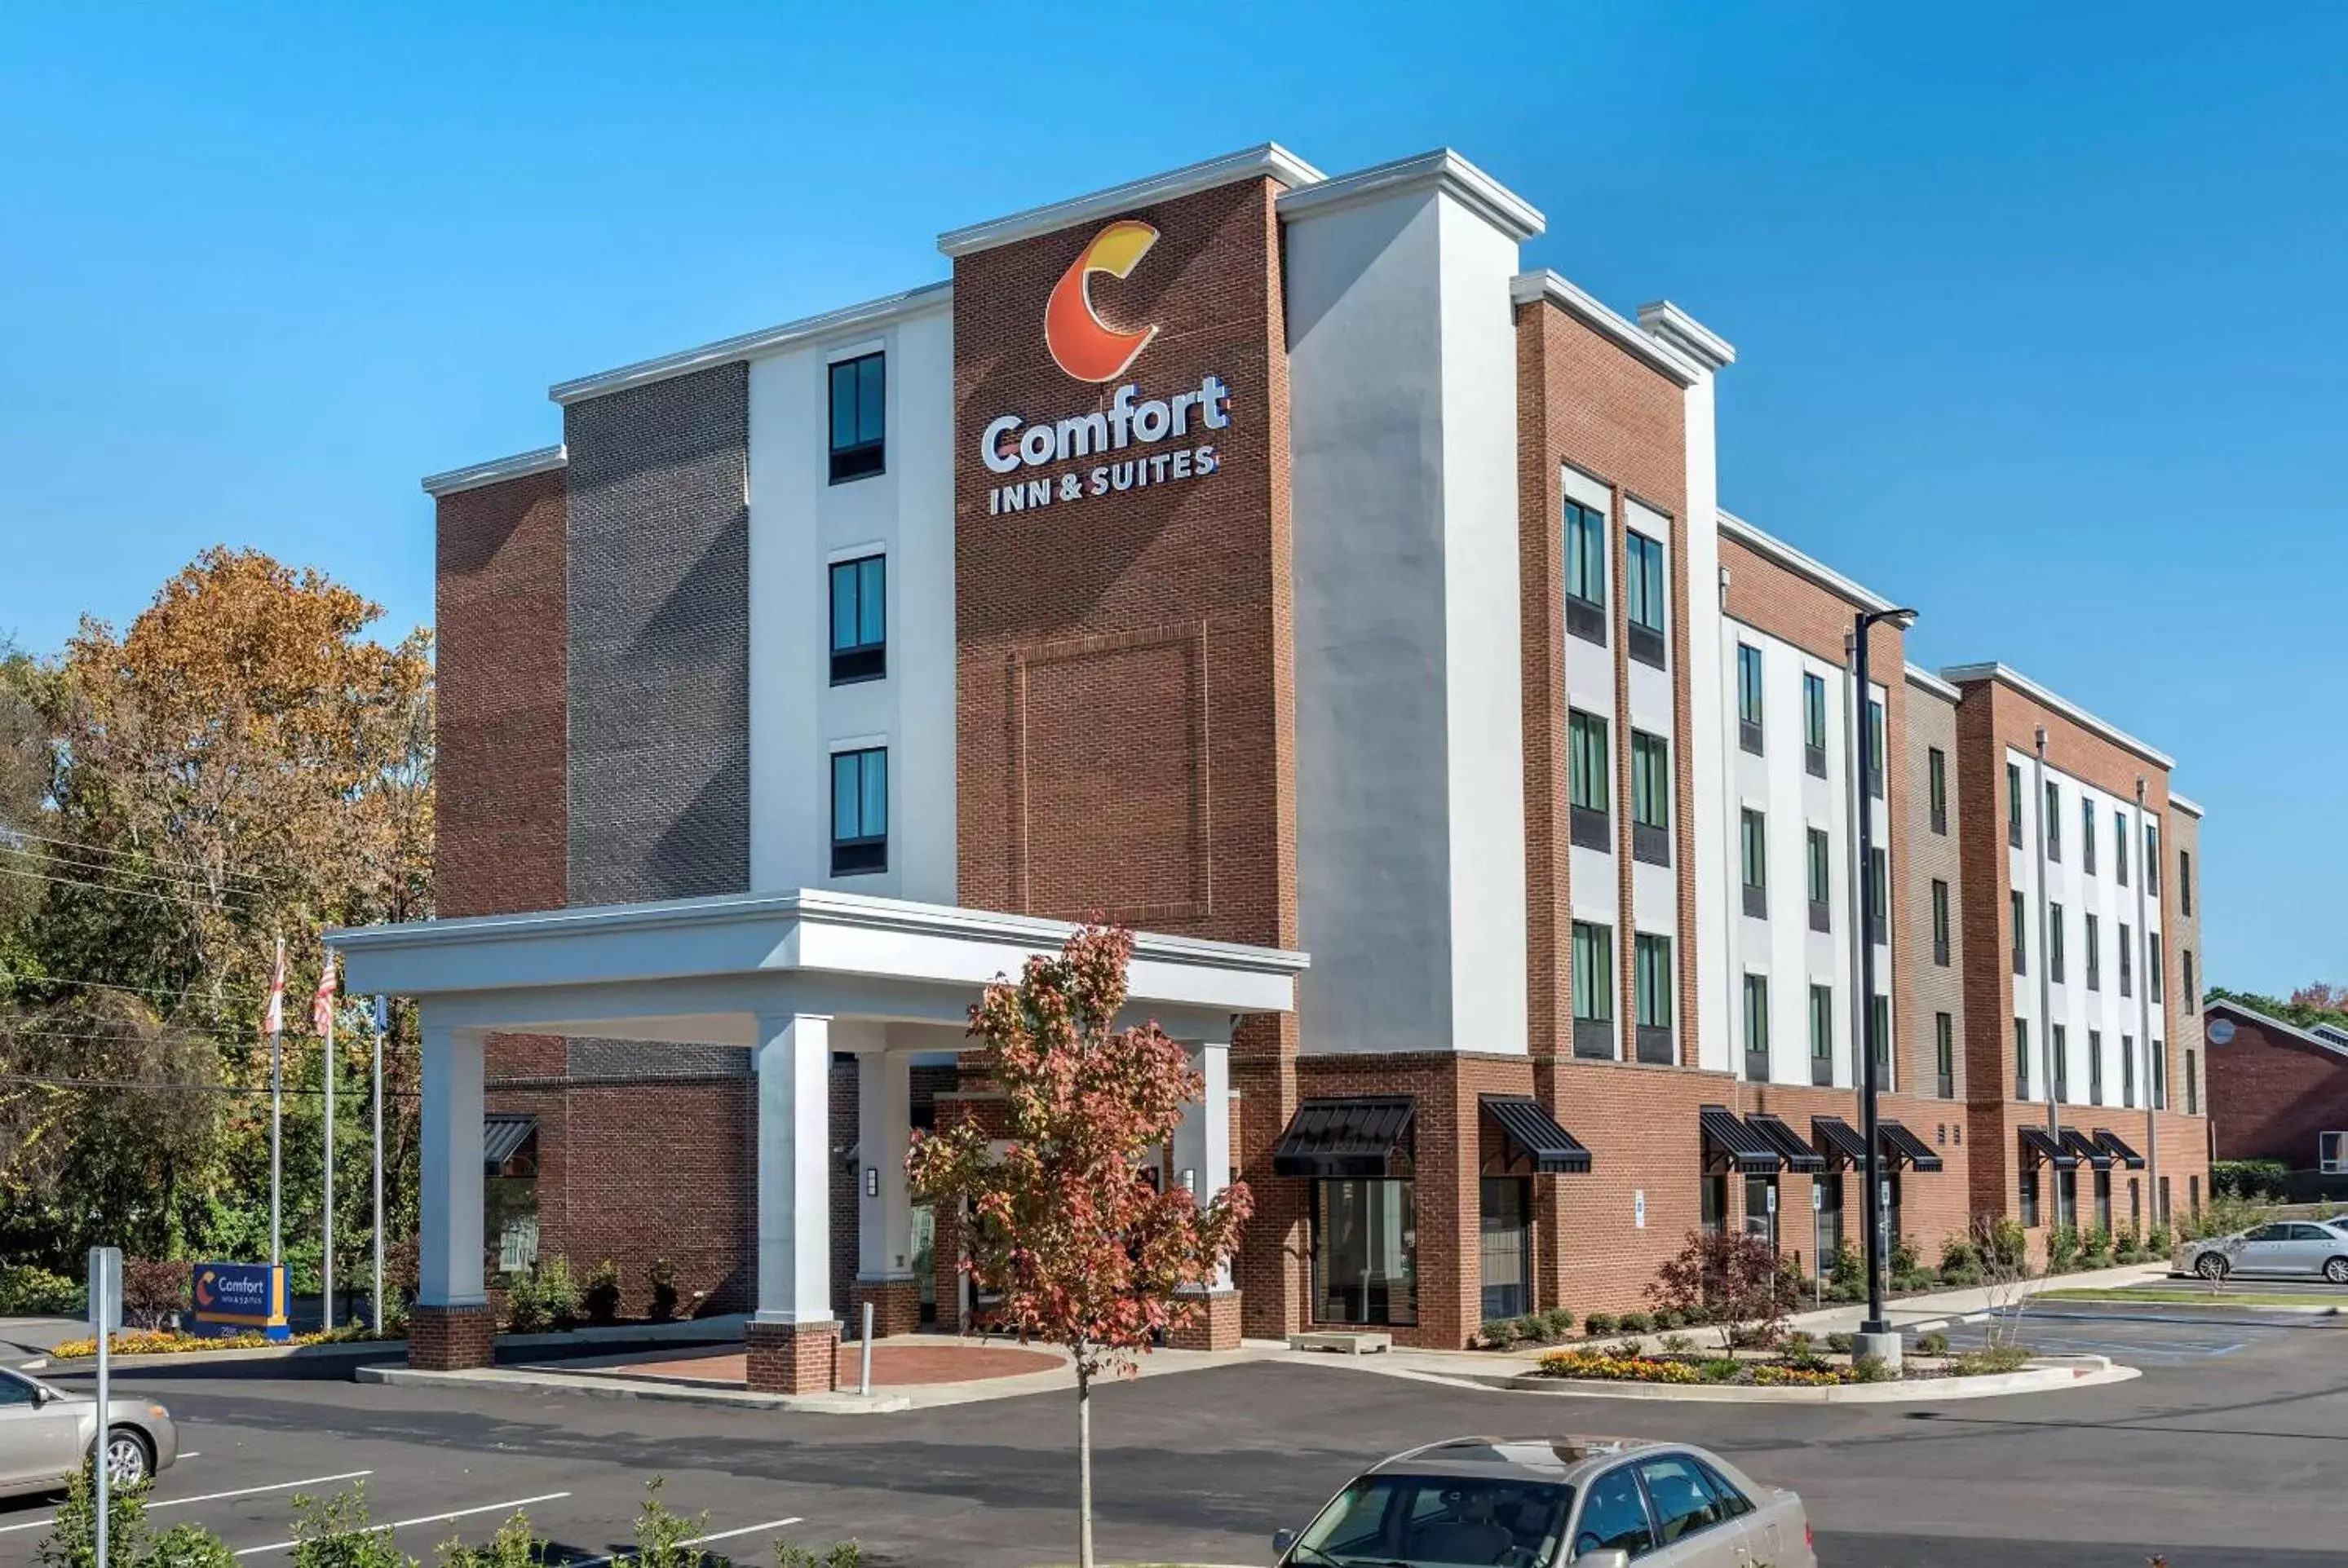 Property Building in Comfort Inn & Suites Downtown near University